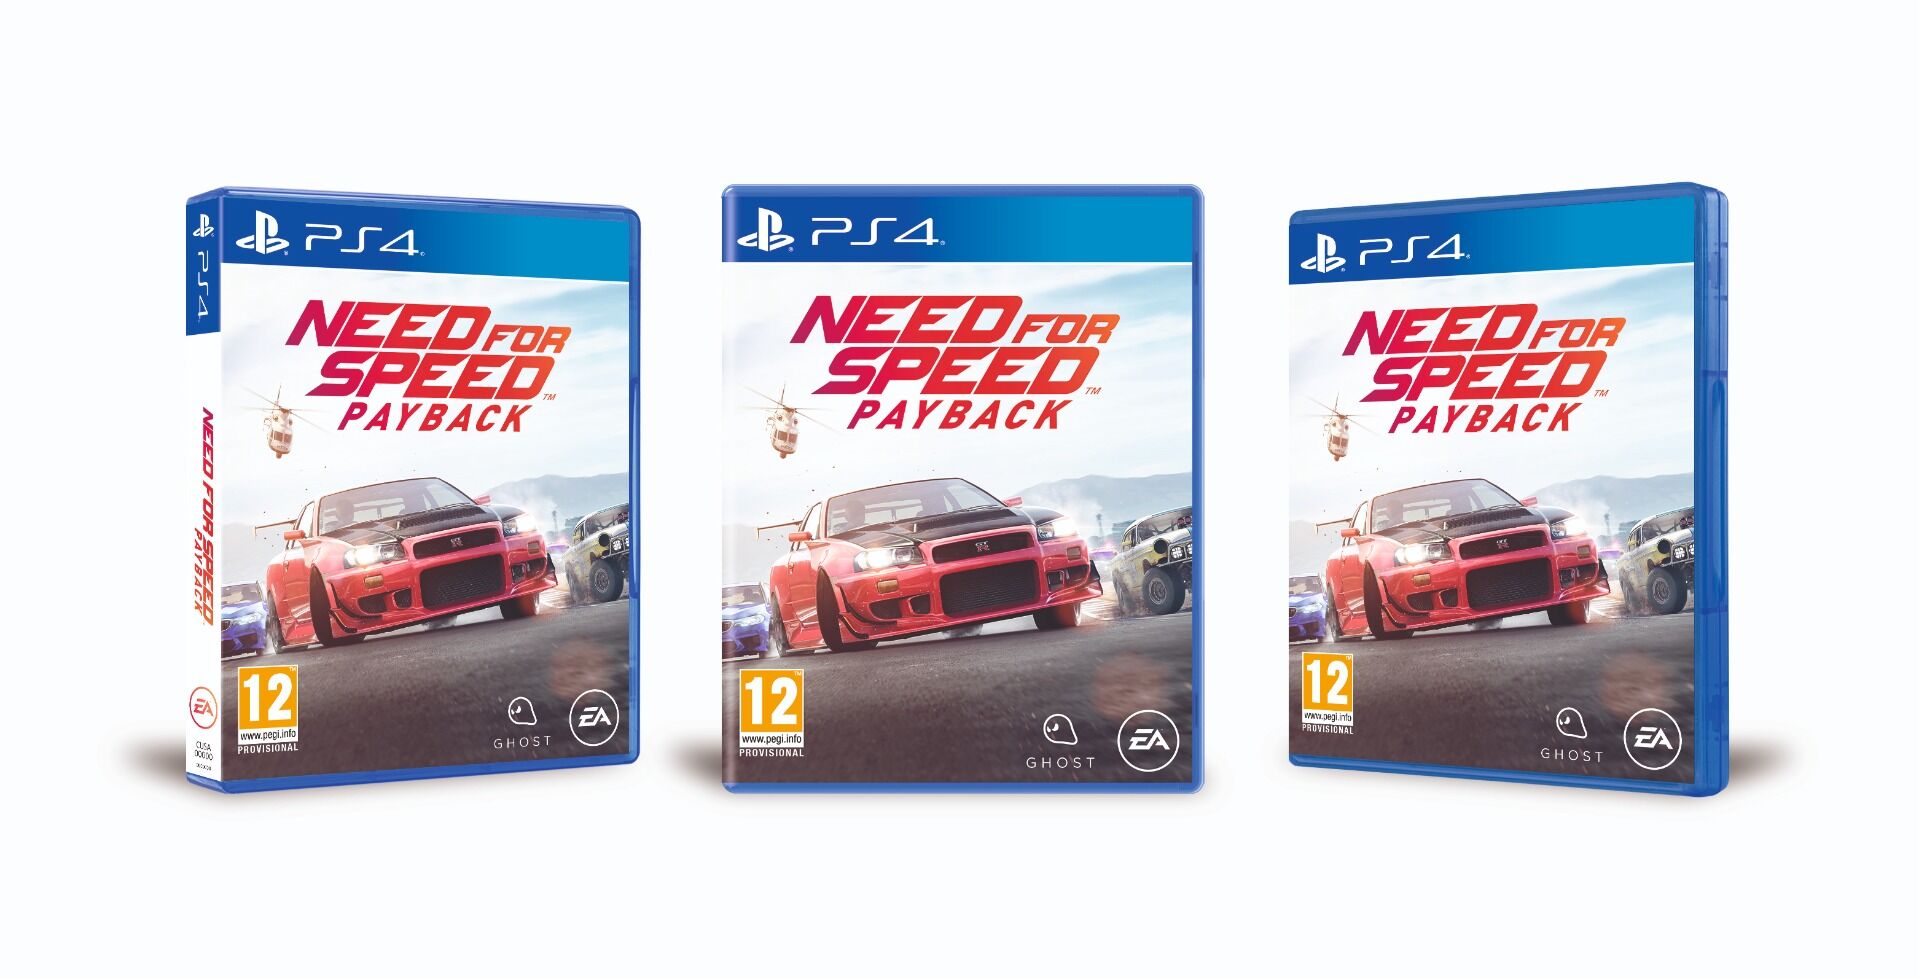 Need for Speed ps4 диск. Need for Speed Payback ps4 диск. Need for Speed Payback пс4. Nfs payback ps4